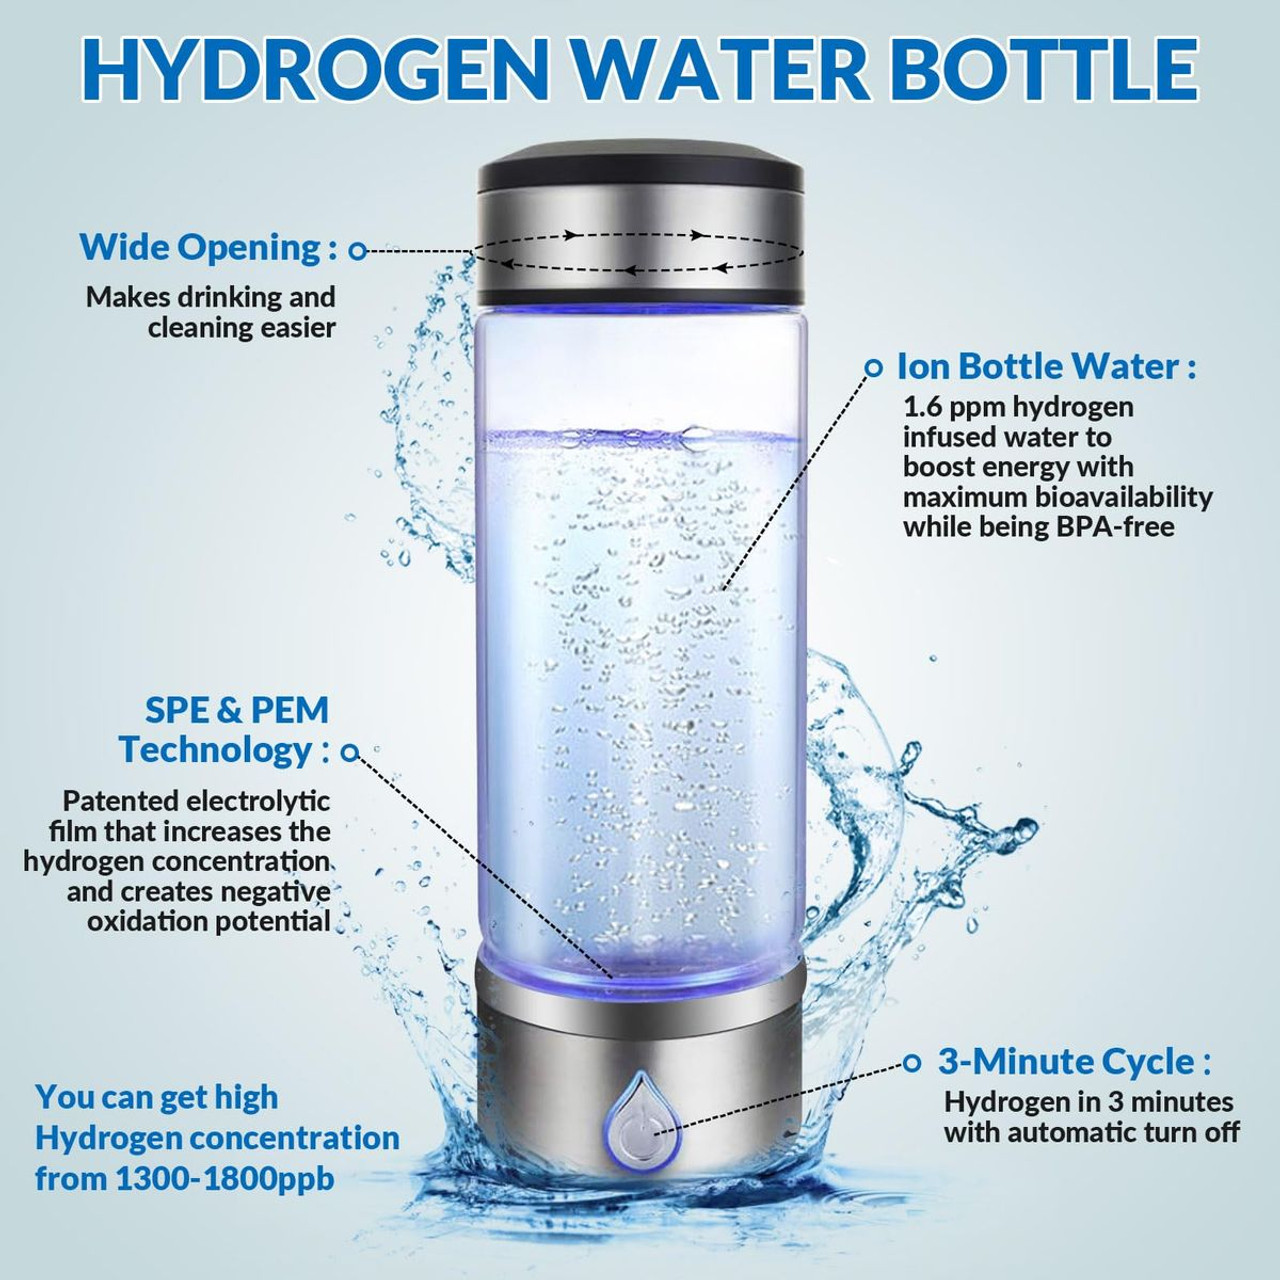 Hydrogen Water Bottle,Rechargeable Portable Hydrogen Water Bottle Generator,420ml Hydrogen Water Machine for Home,Office,Travel product image